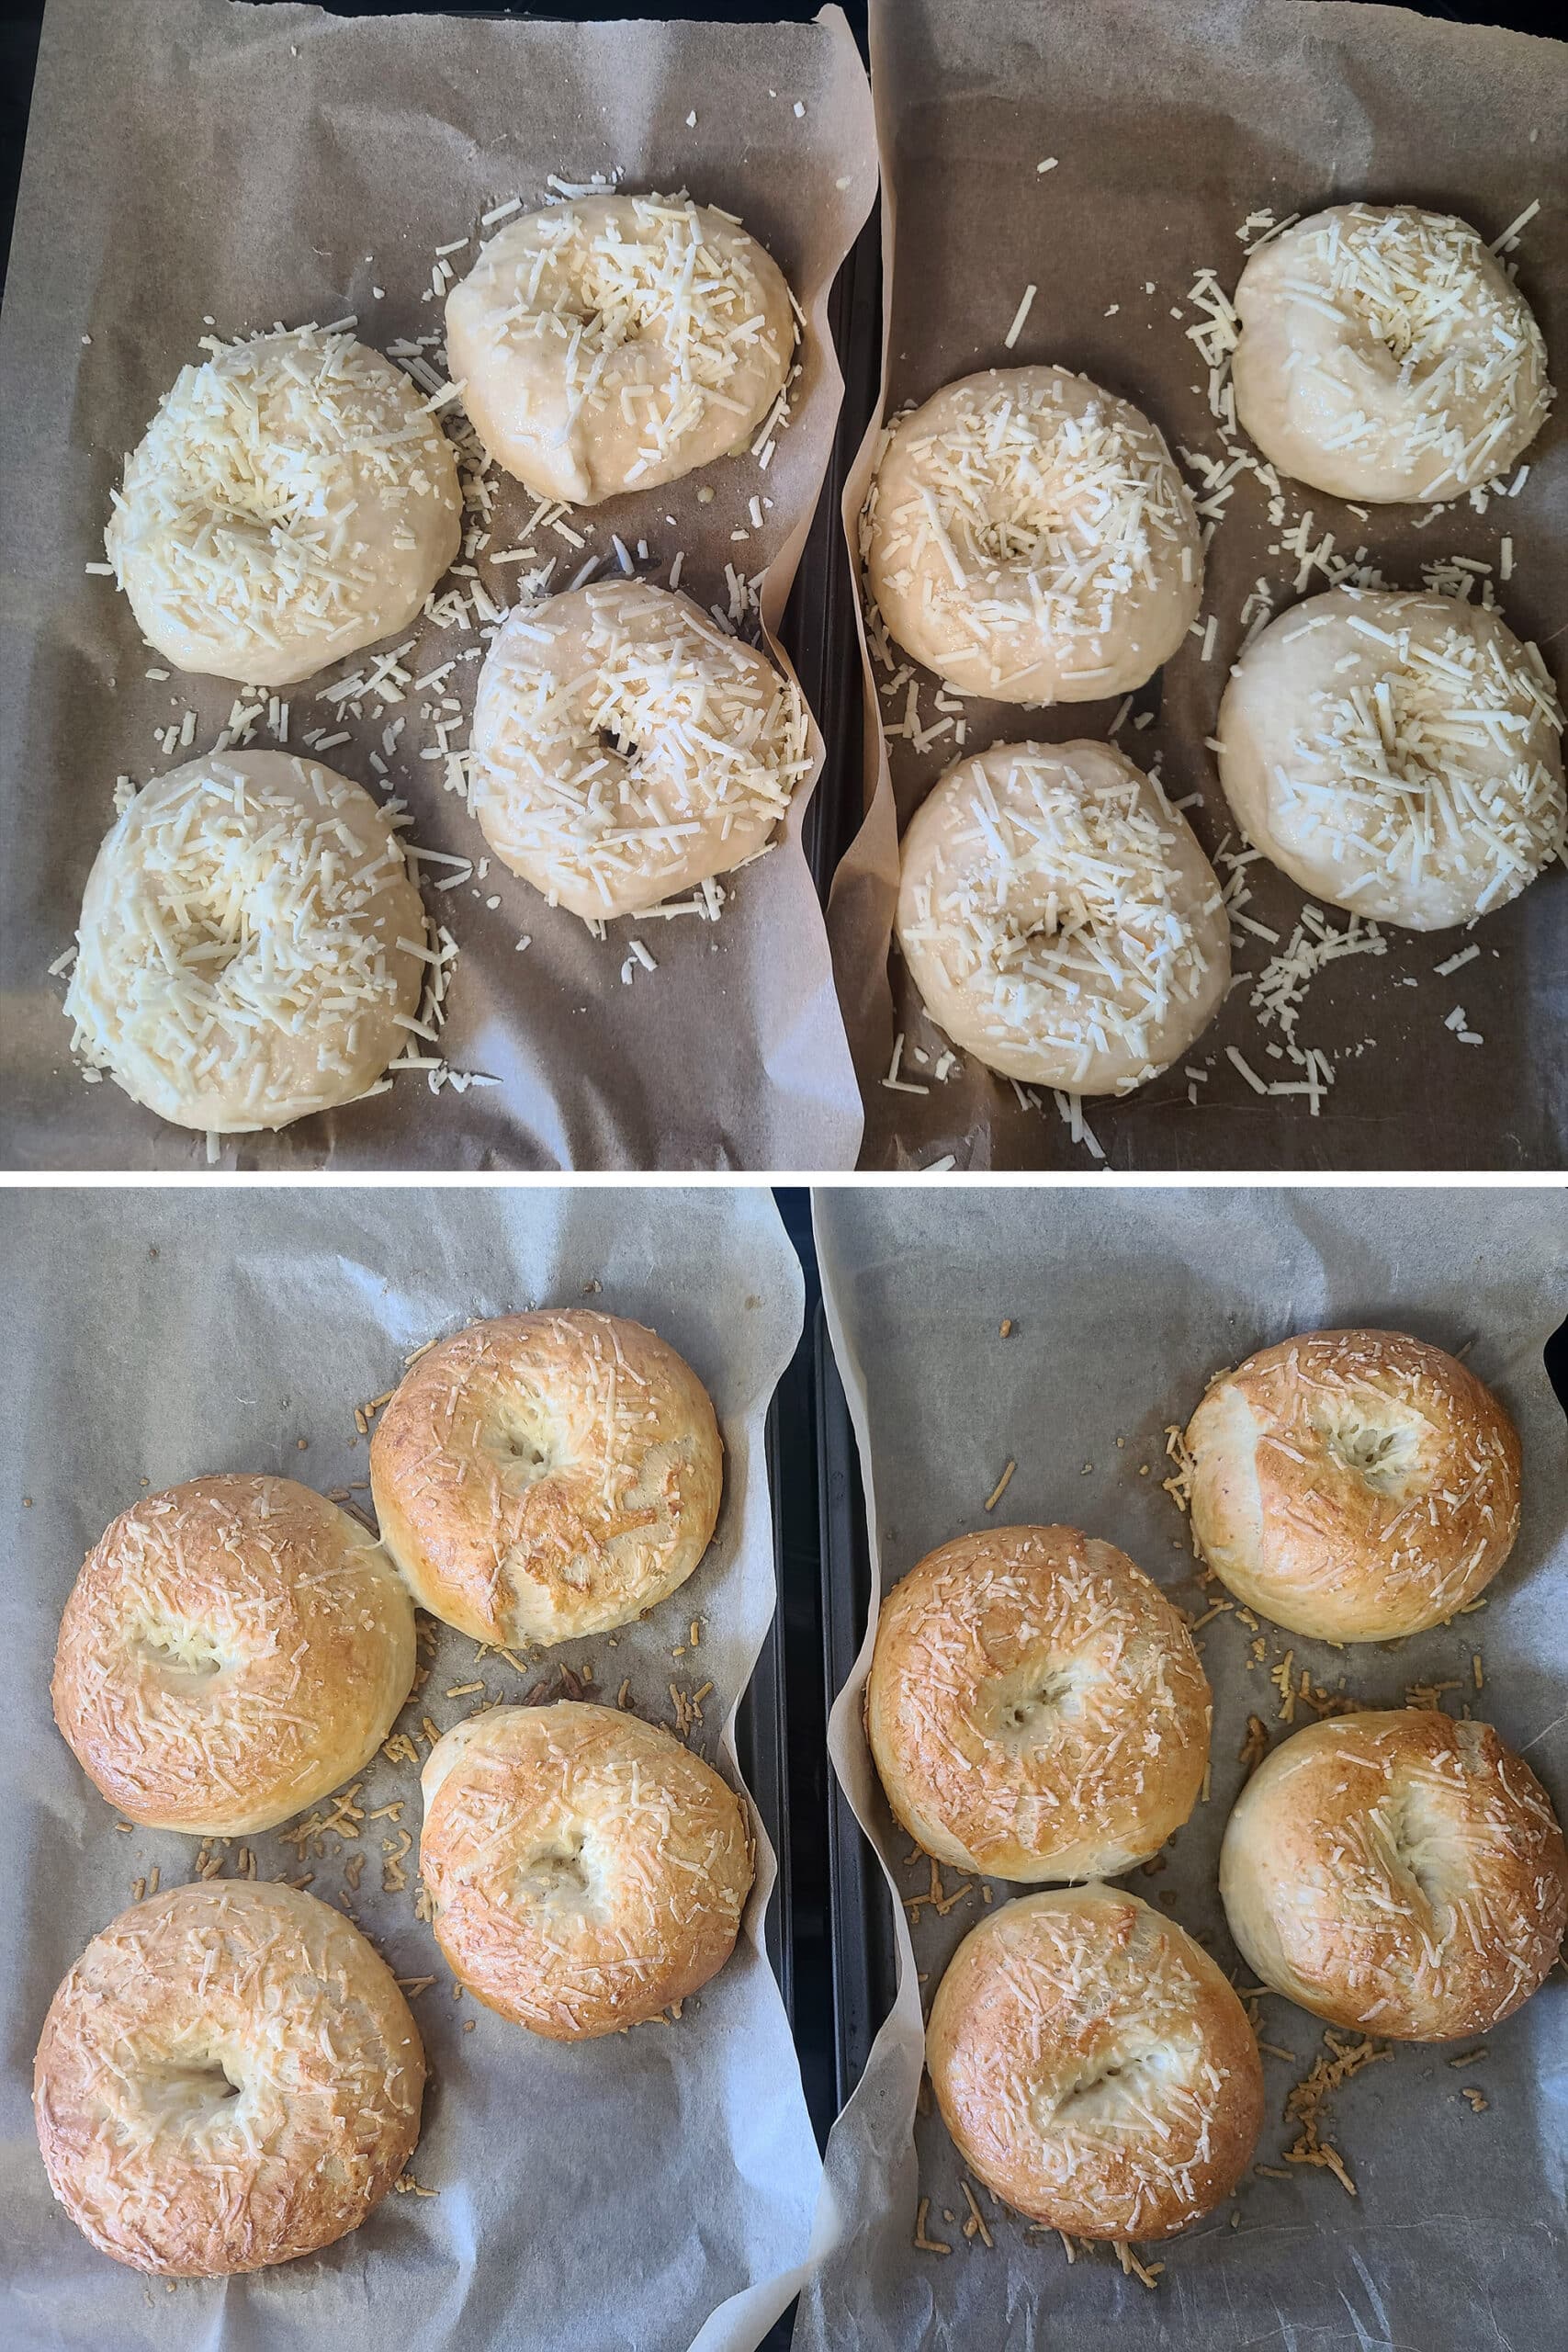 A 2 part image showing the 8 bagels, before and after baking.